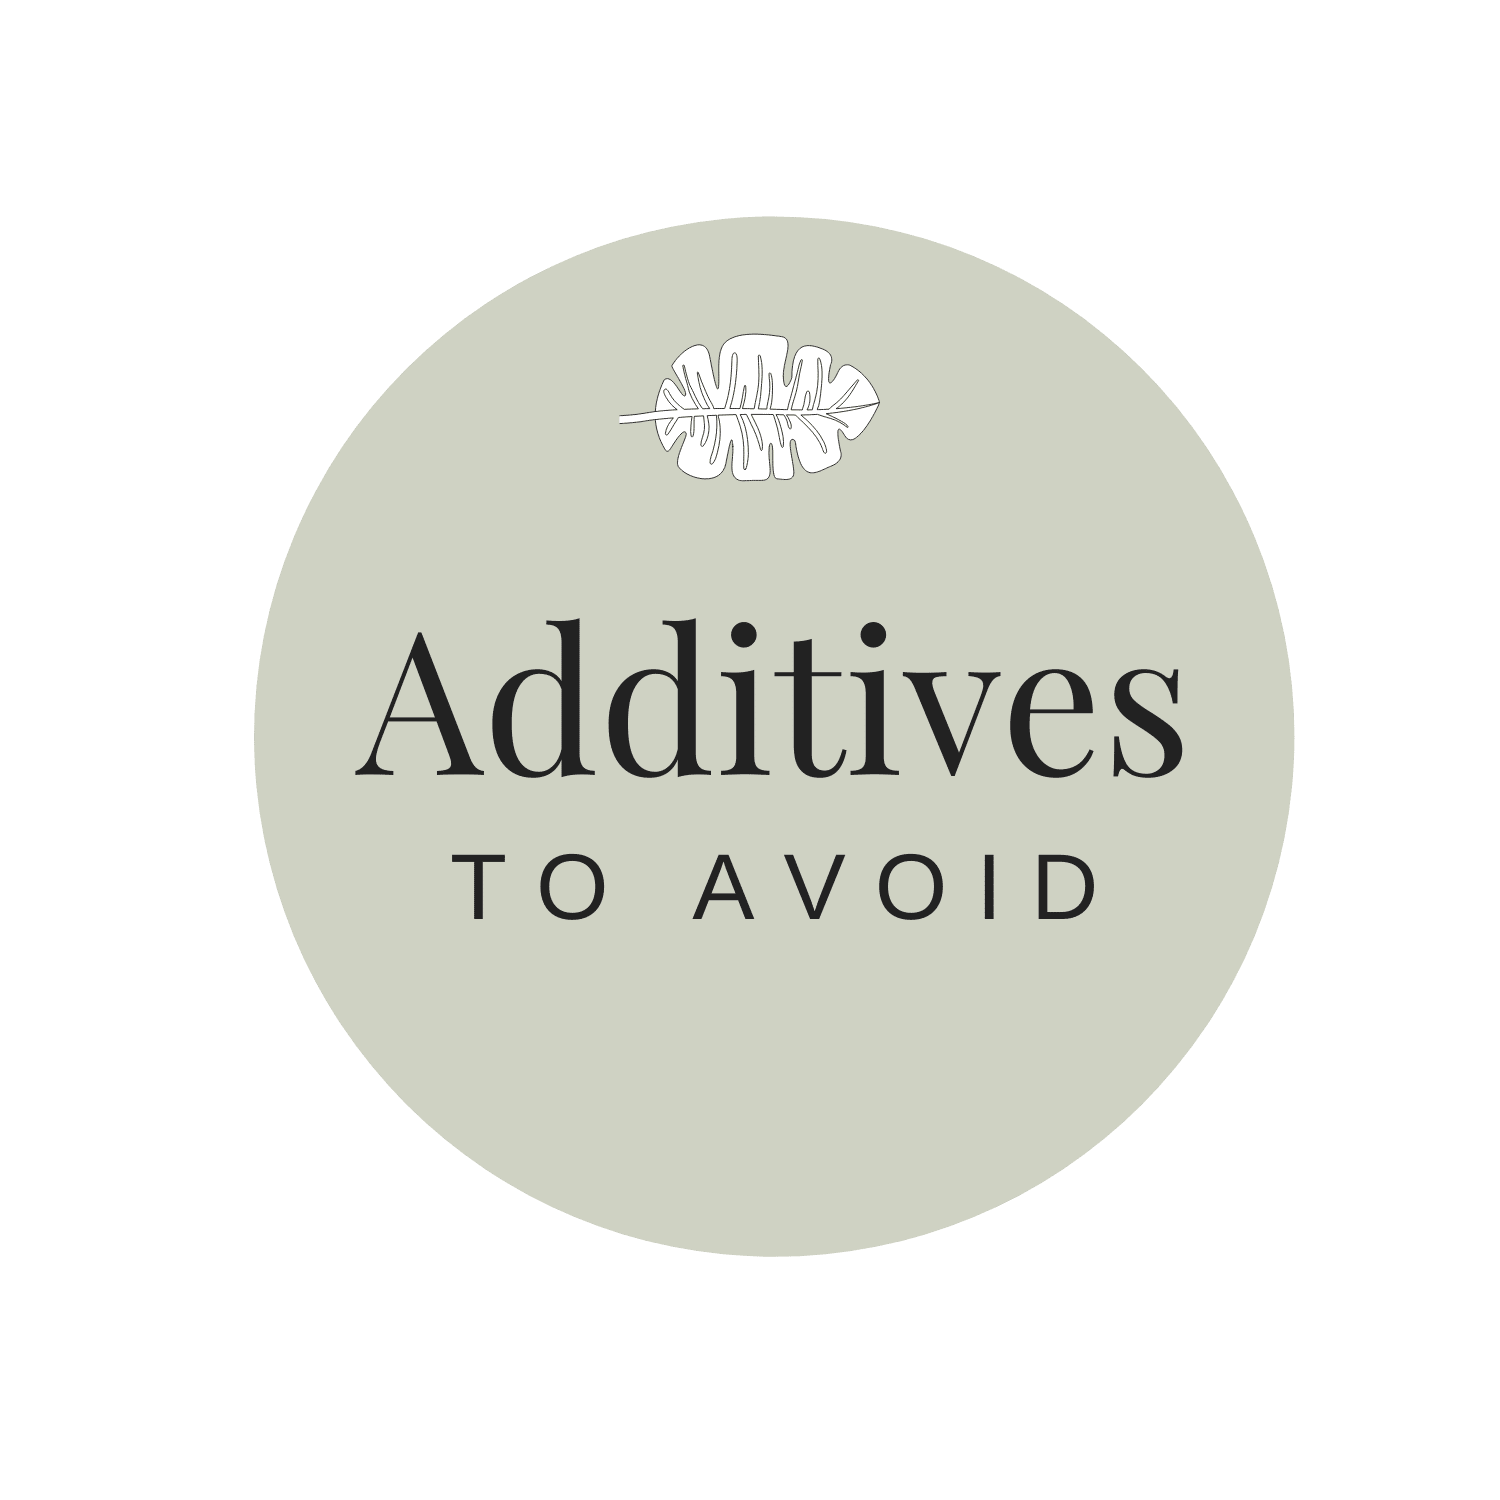 Additives To Avoid